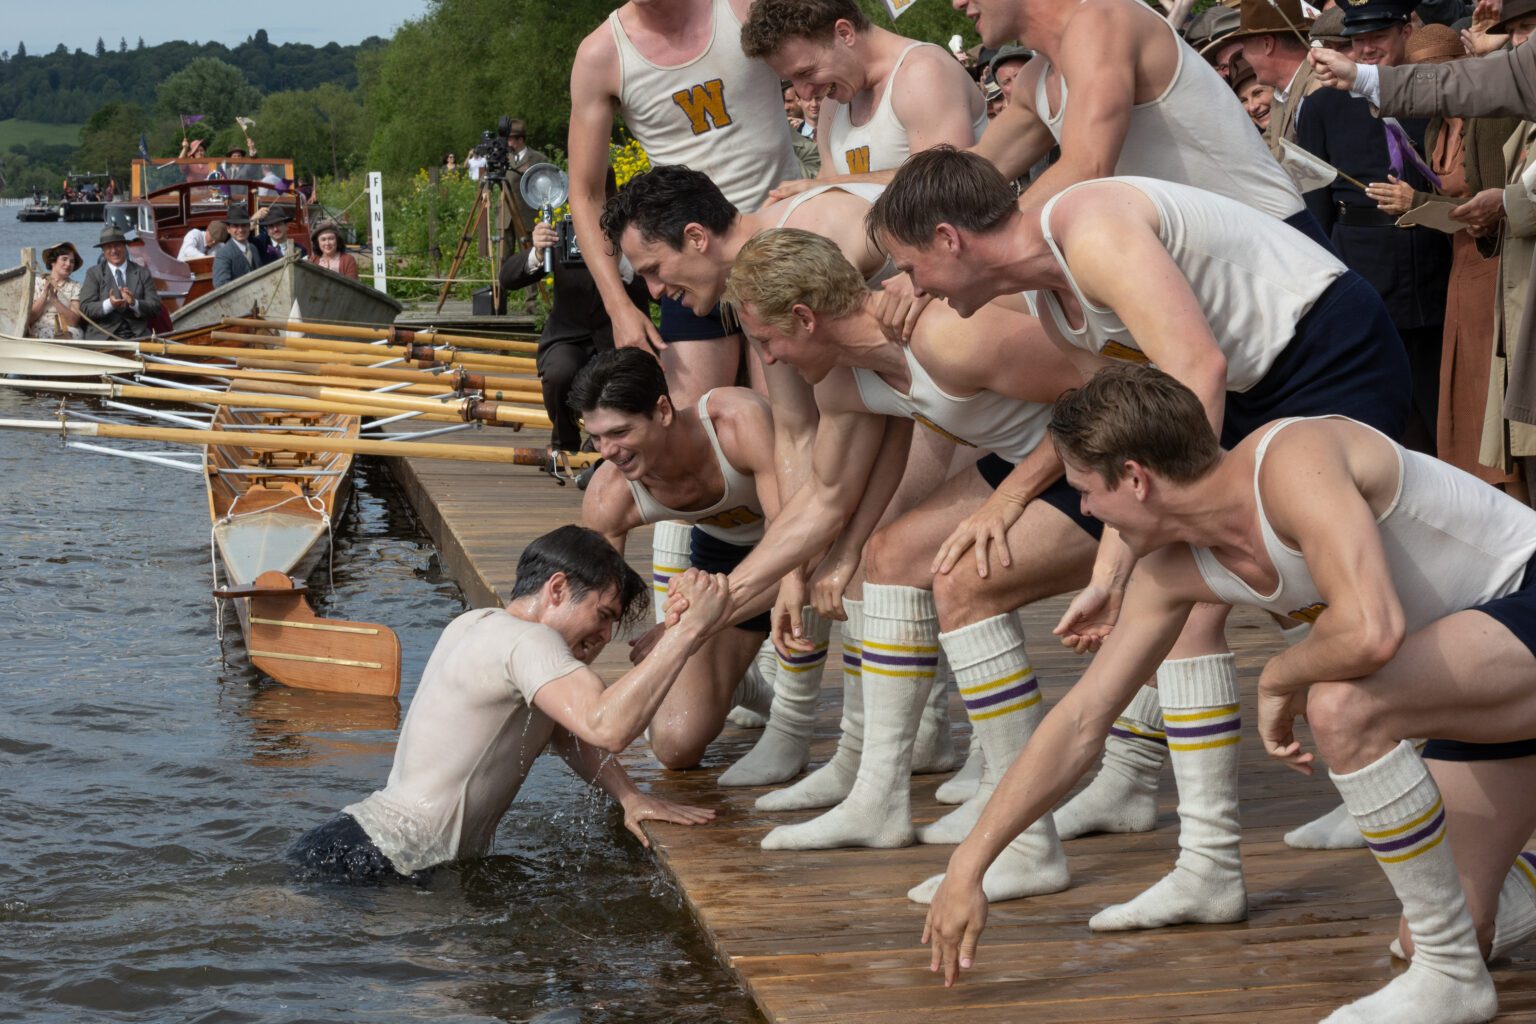 In a movie scene, young men in tank tops and socks pull a rowing teammate out of the lake next to a row boat.